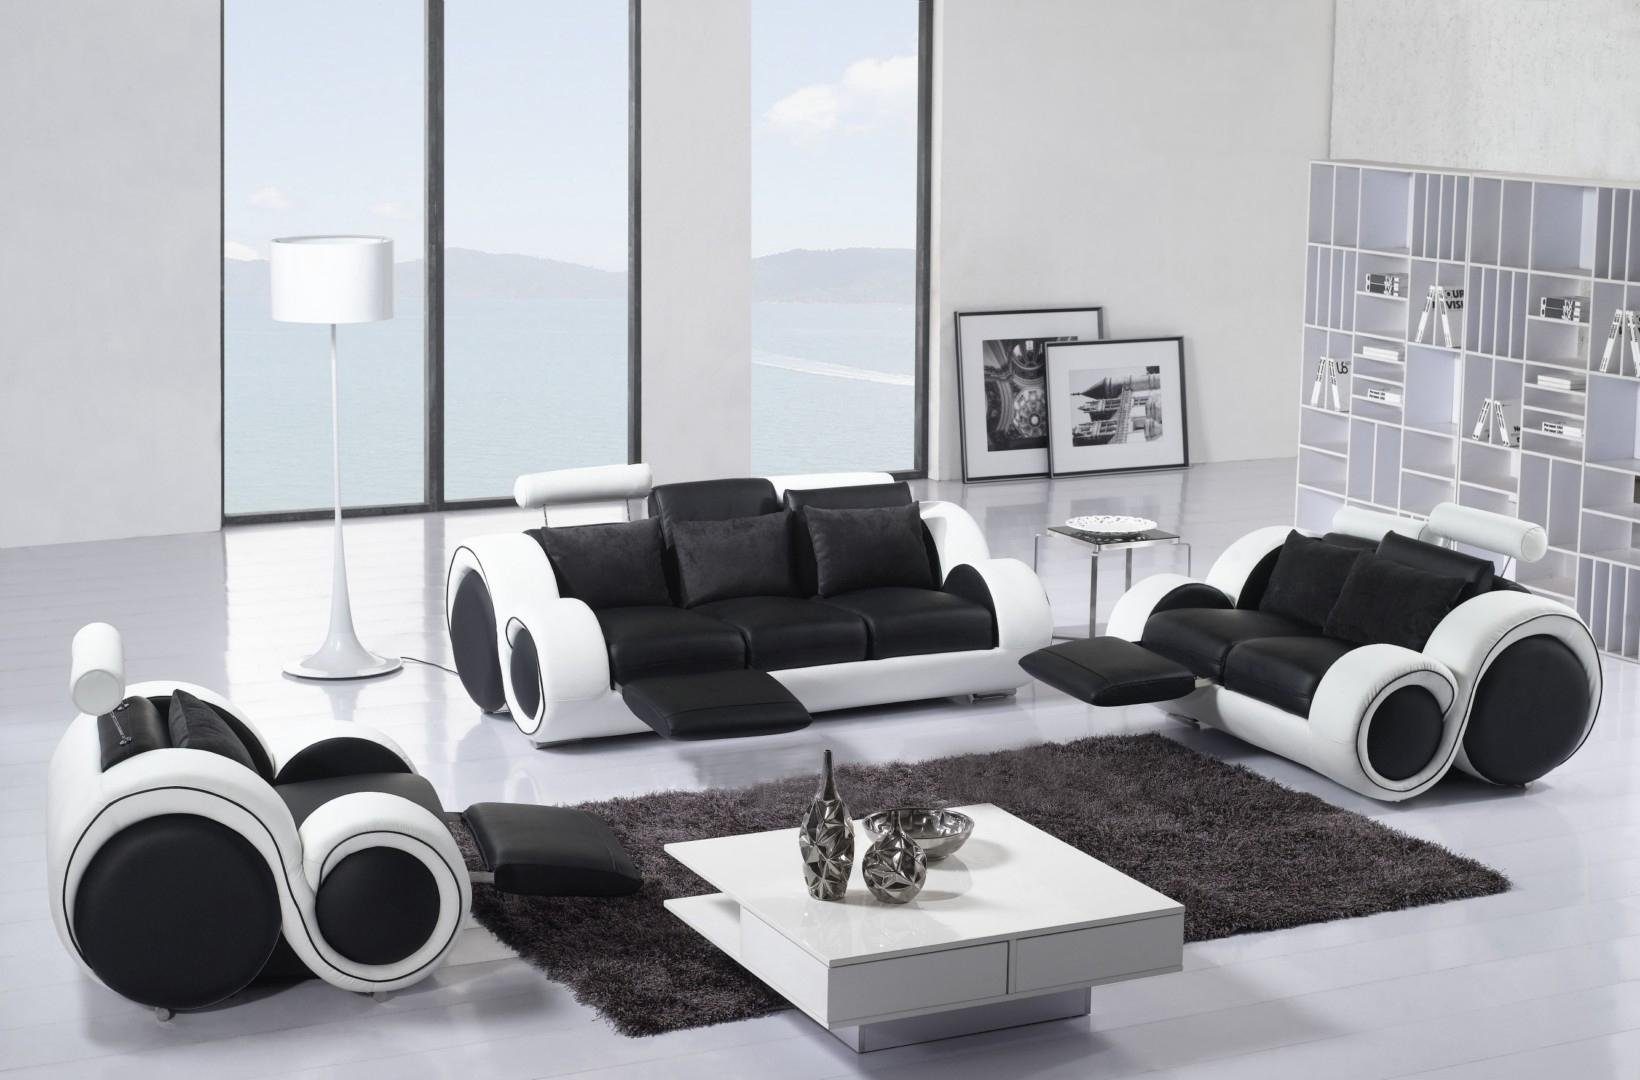 Funktion Sofagarnitur Couch, 3+2+1 Sitzer Made Europe Relax Moderne JVmoebel Sofa in Sofa